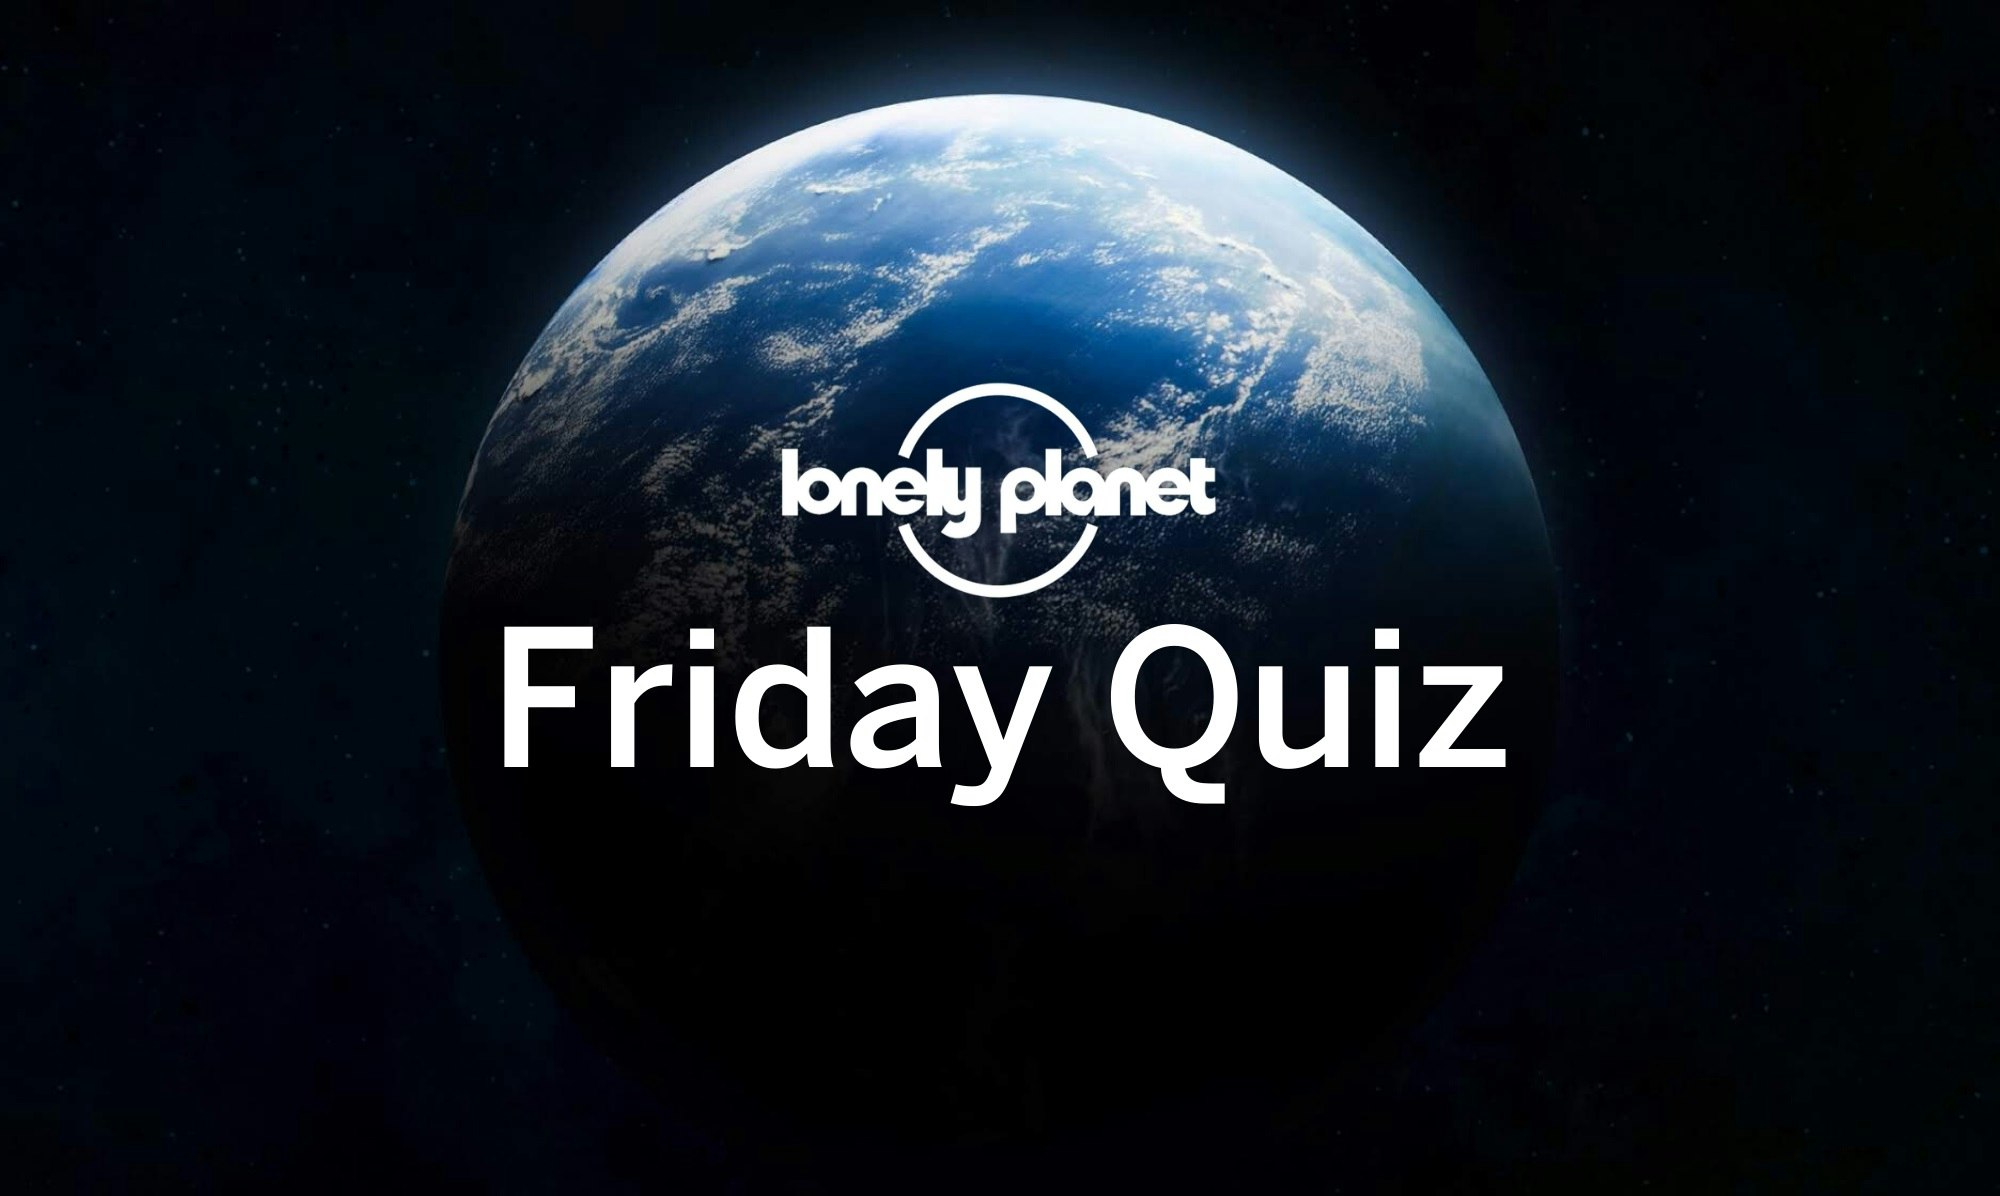 An image of the world with the Lonely Planet logo and the words 'Friday Quiz' written across it.